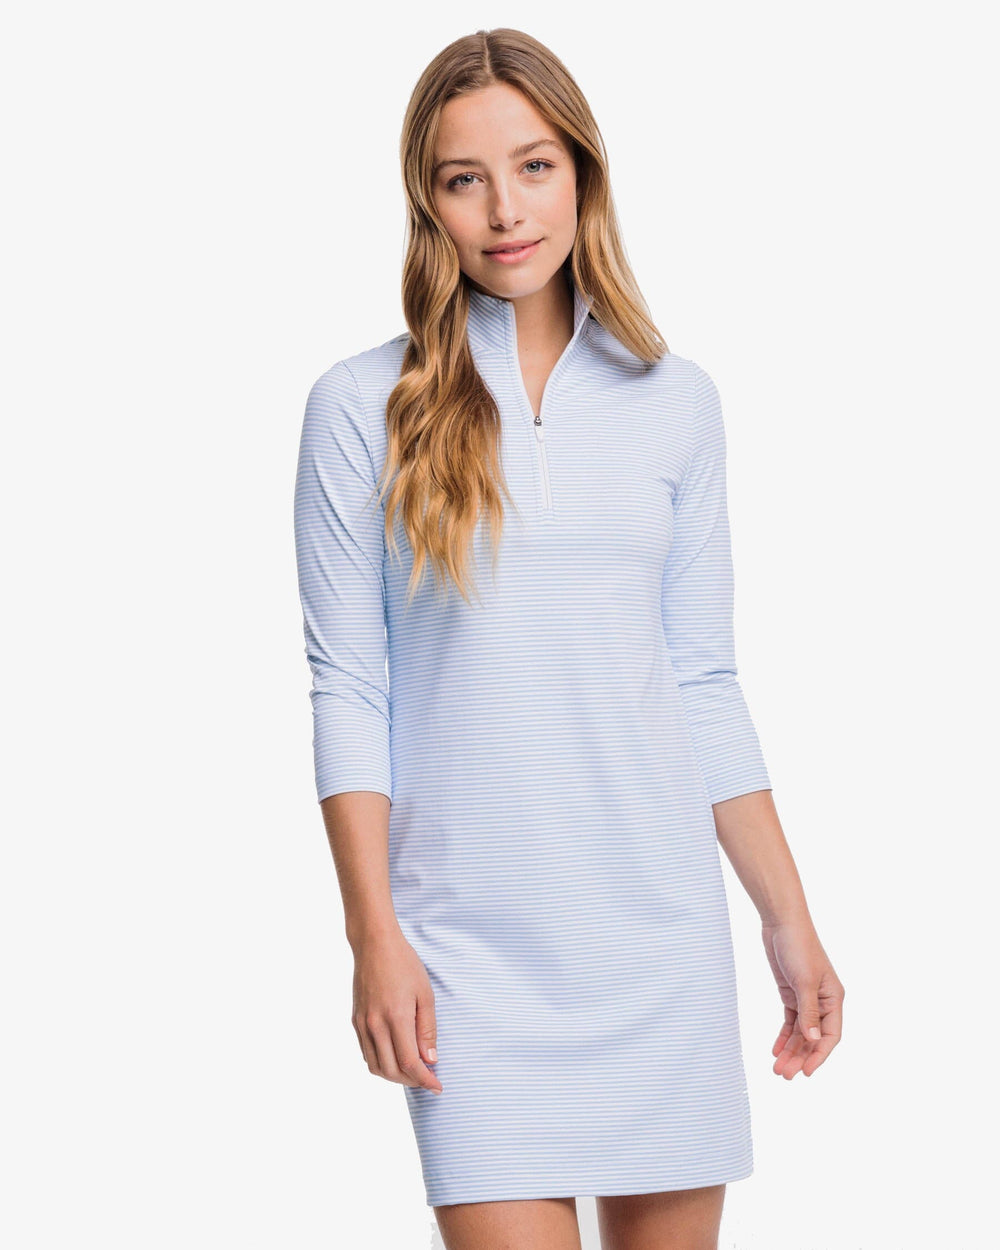 The front view of the Adie Stripe Performance Dress by Southern Tide - Sky Blue